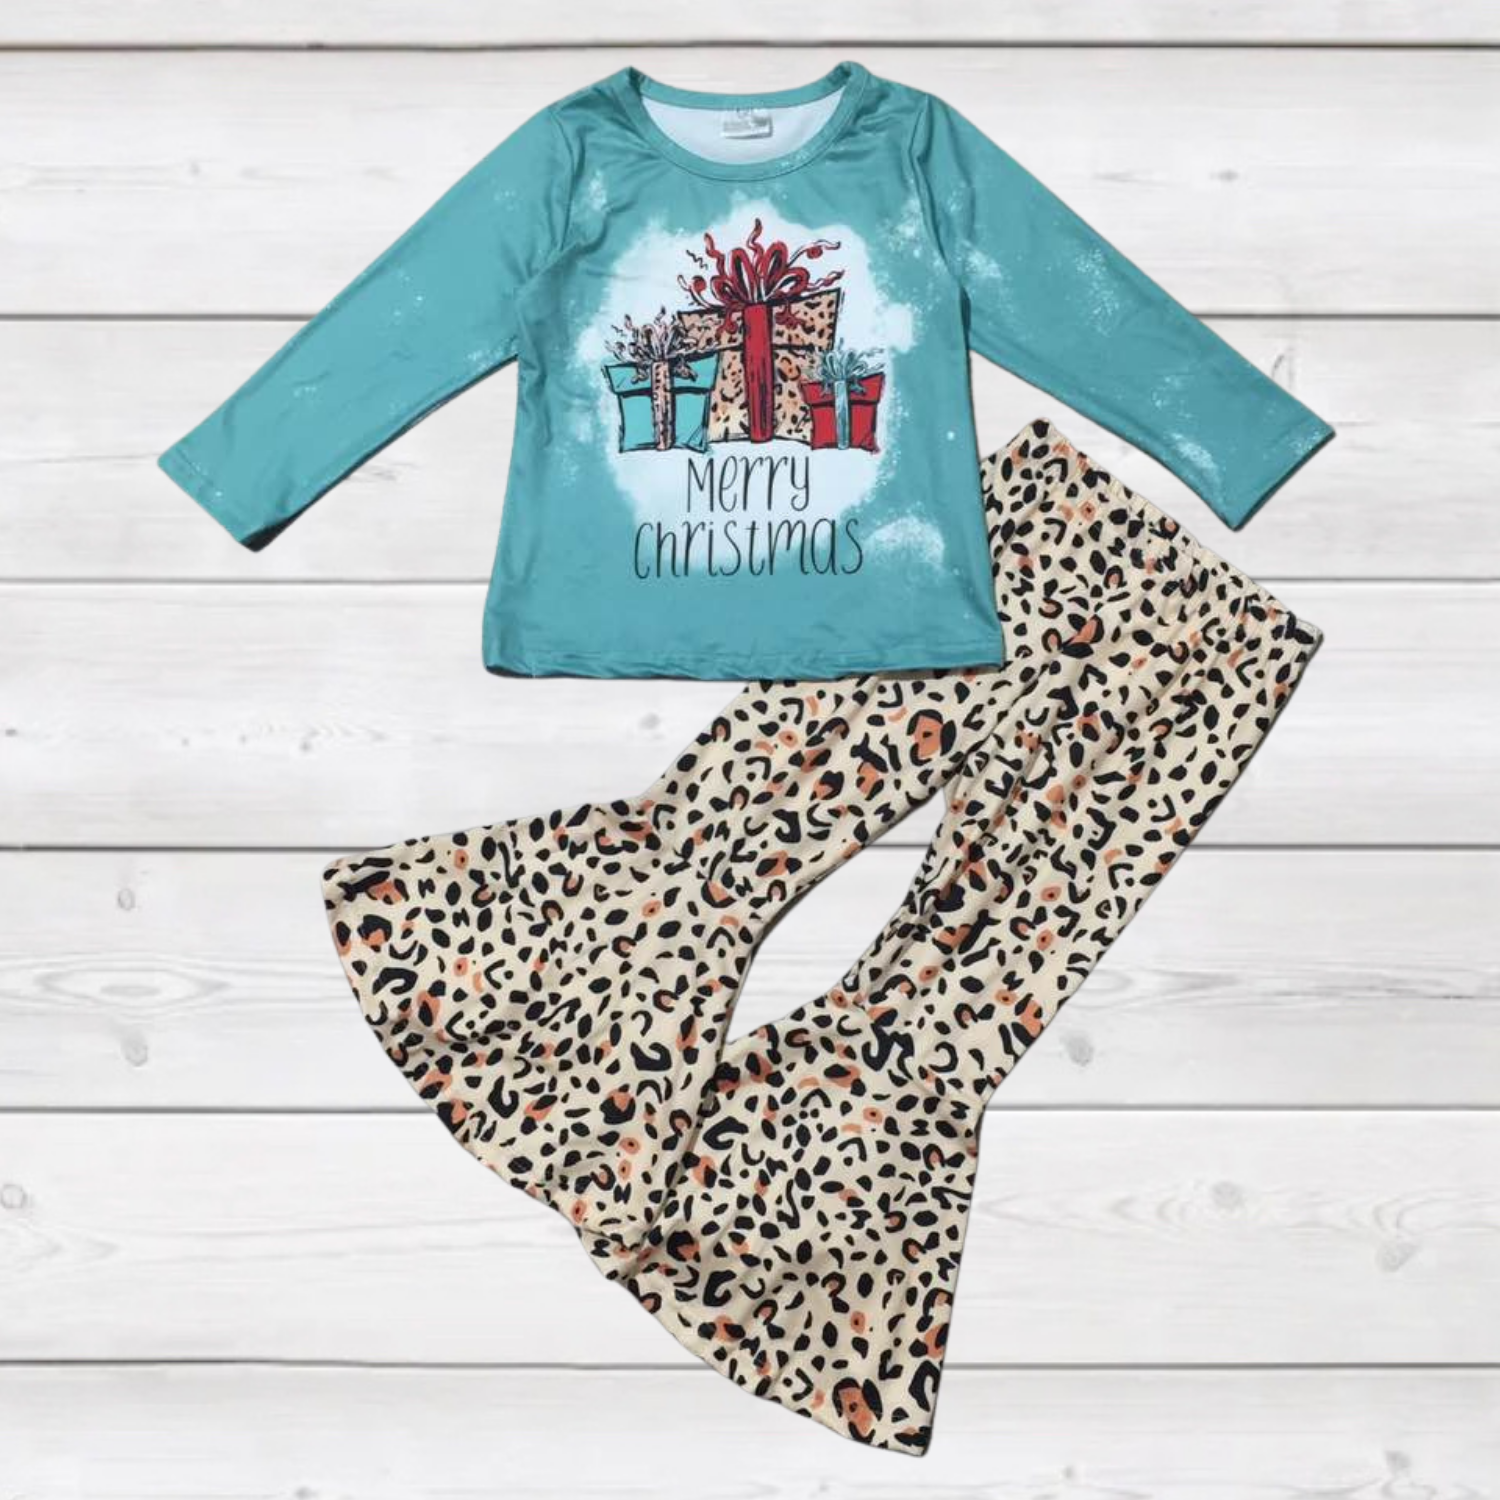 Merry Christmas Presents Teal Top with Leopard Bells